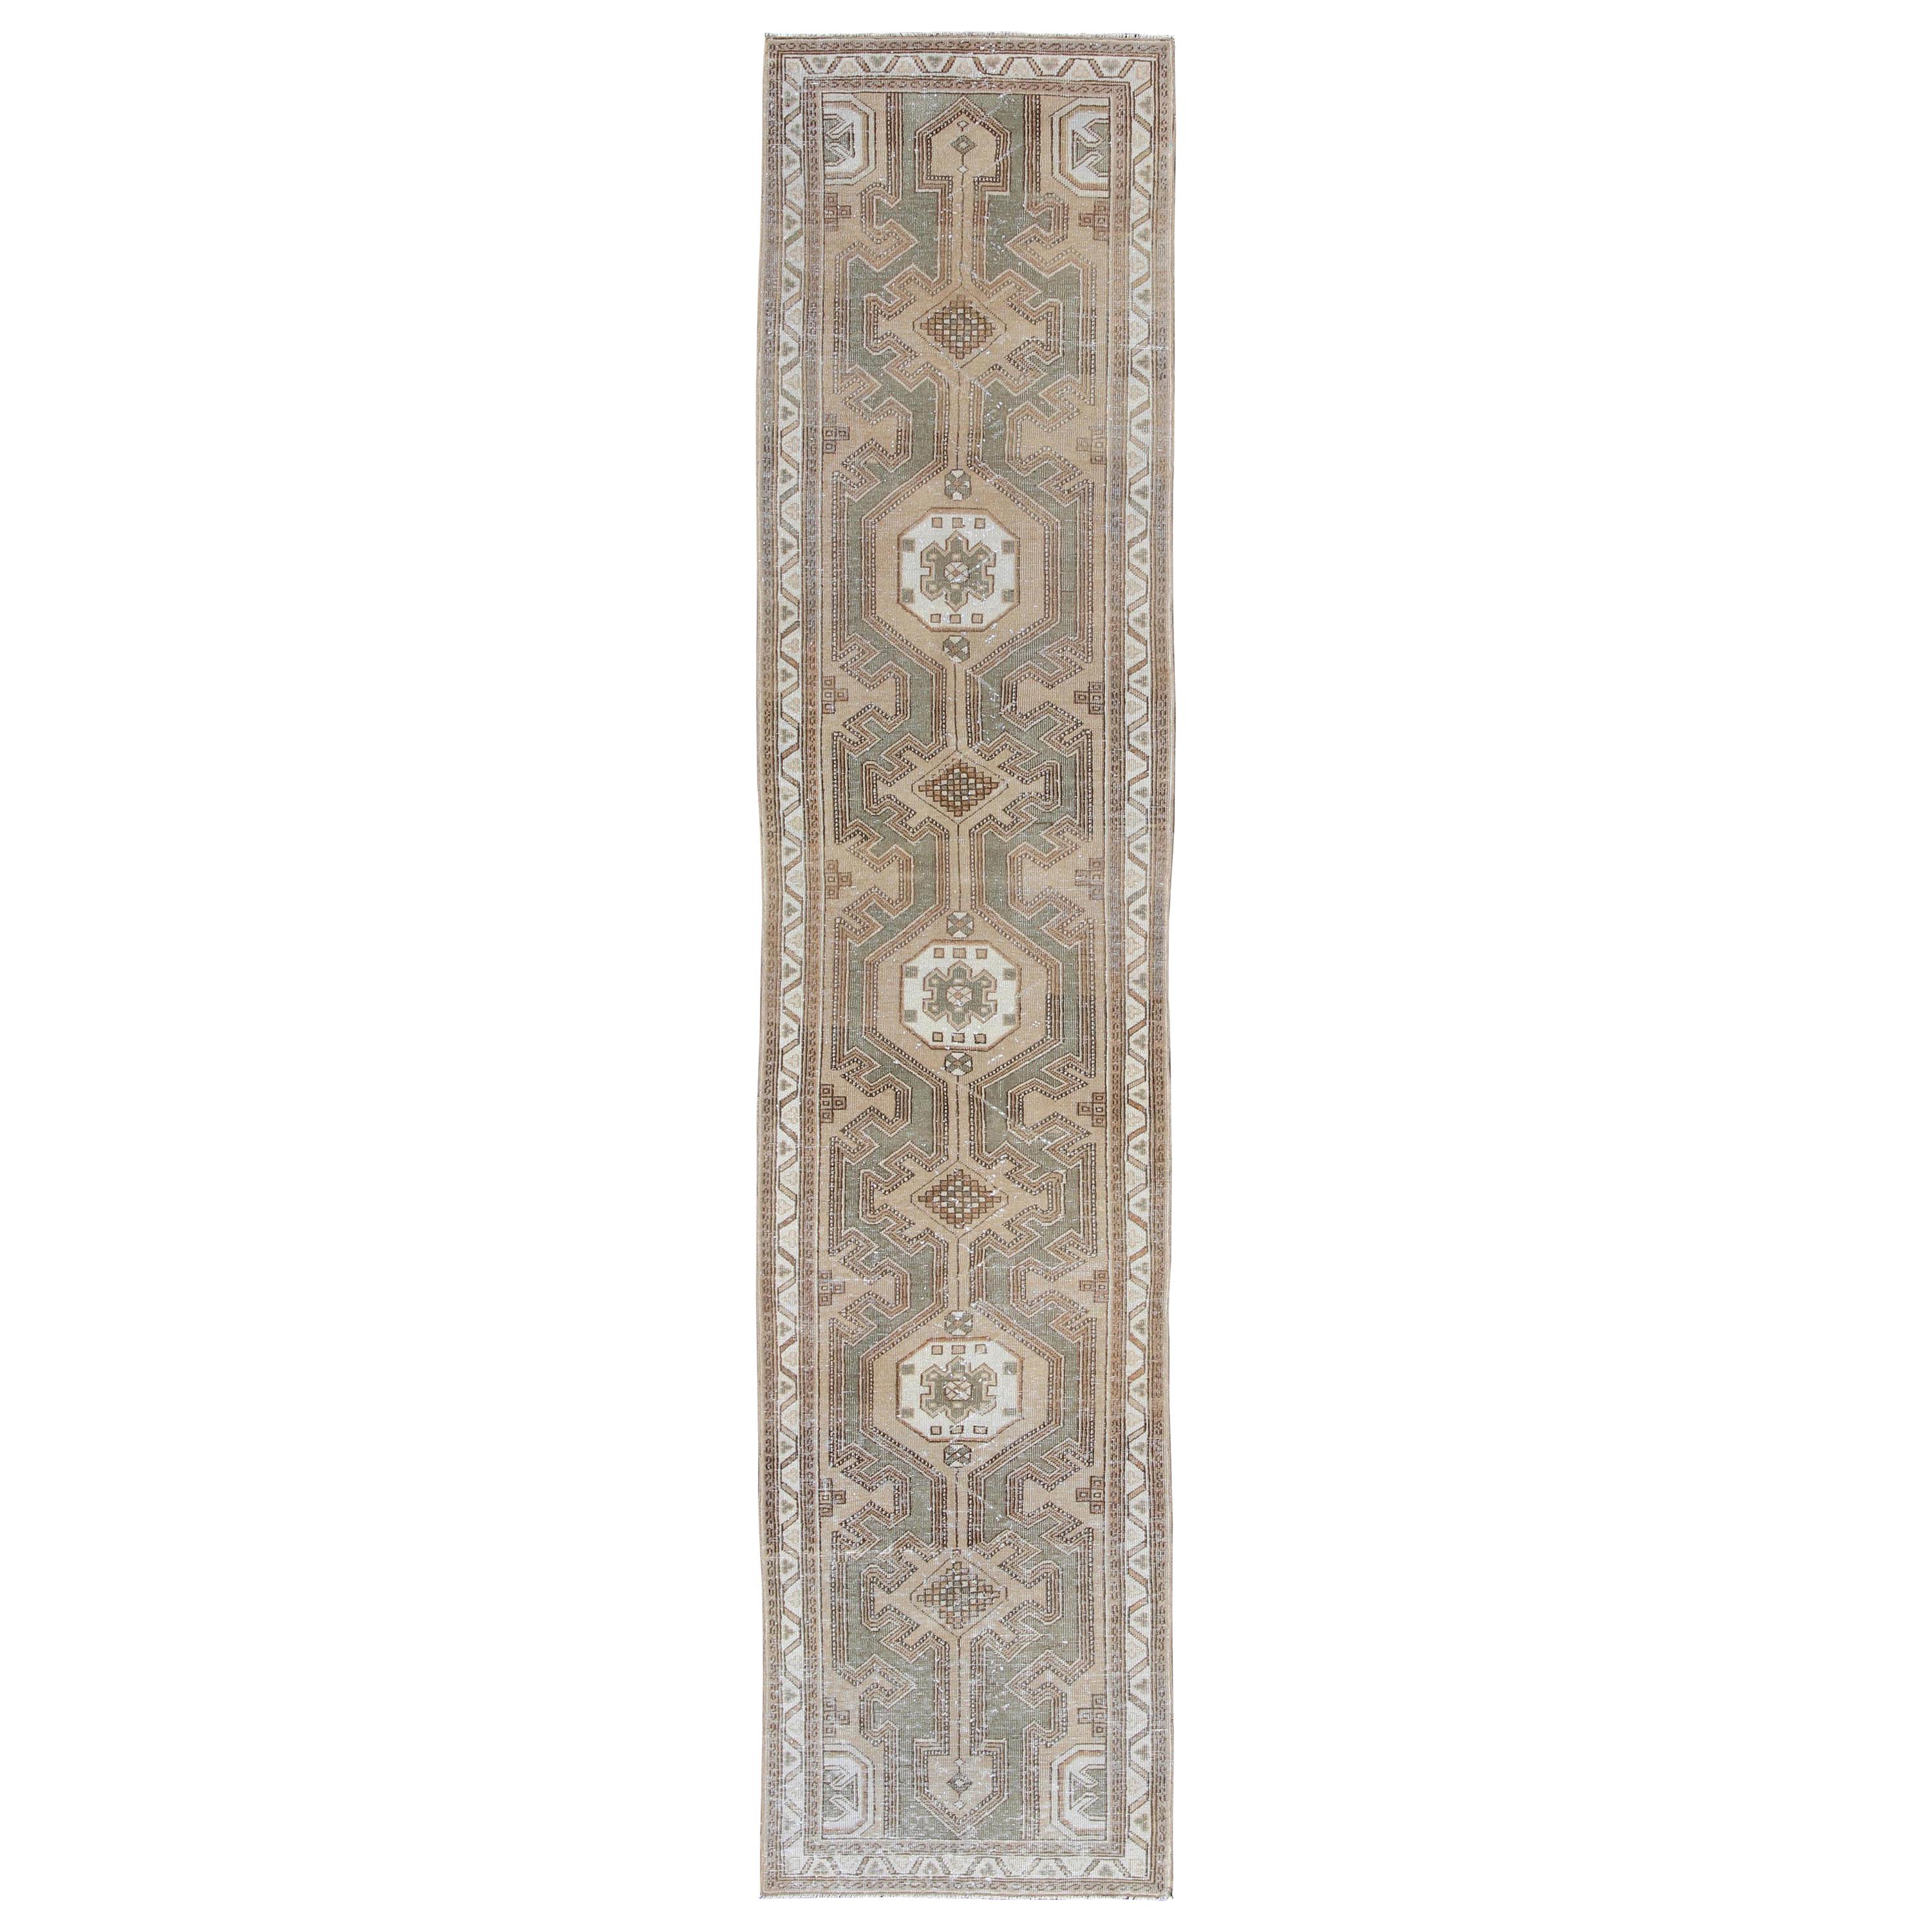 Earth-Tone Antique Persian Serab Runner with Geometric-Style Medallions For Sale